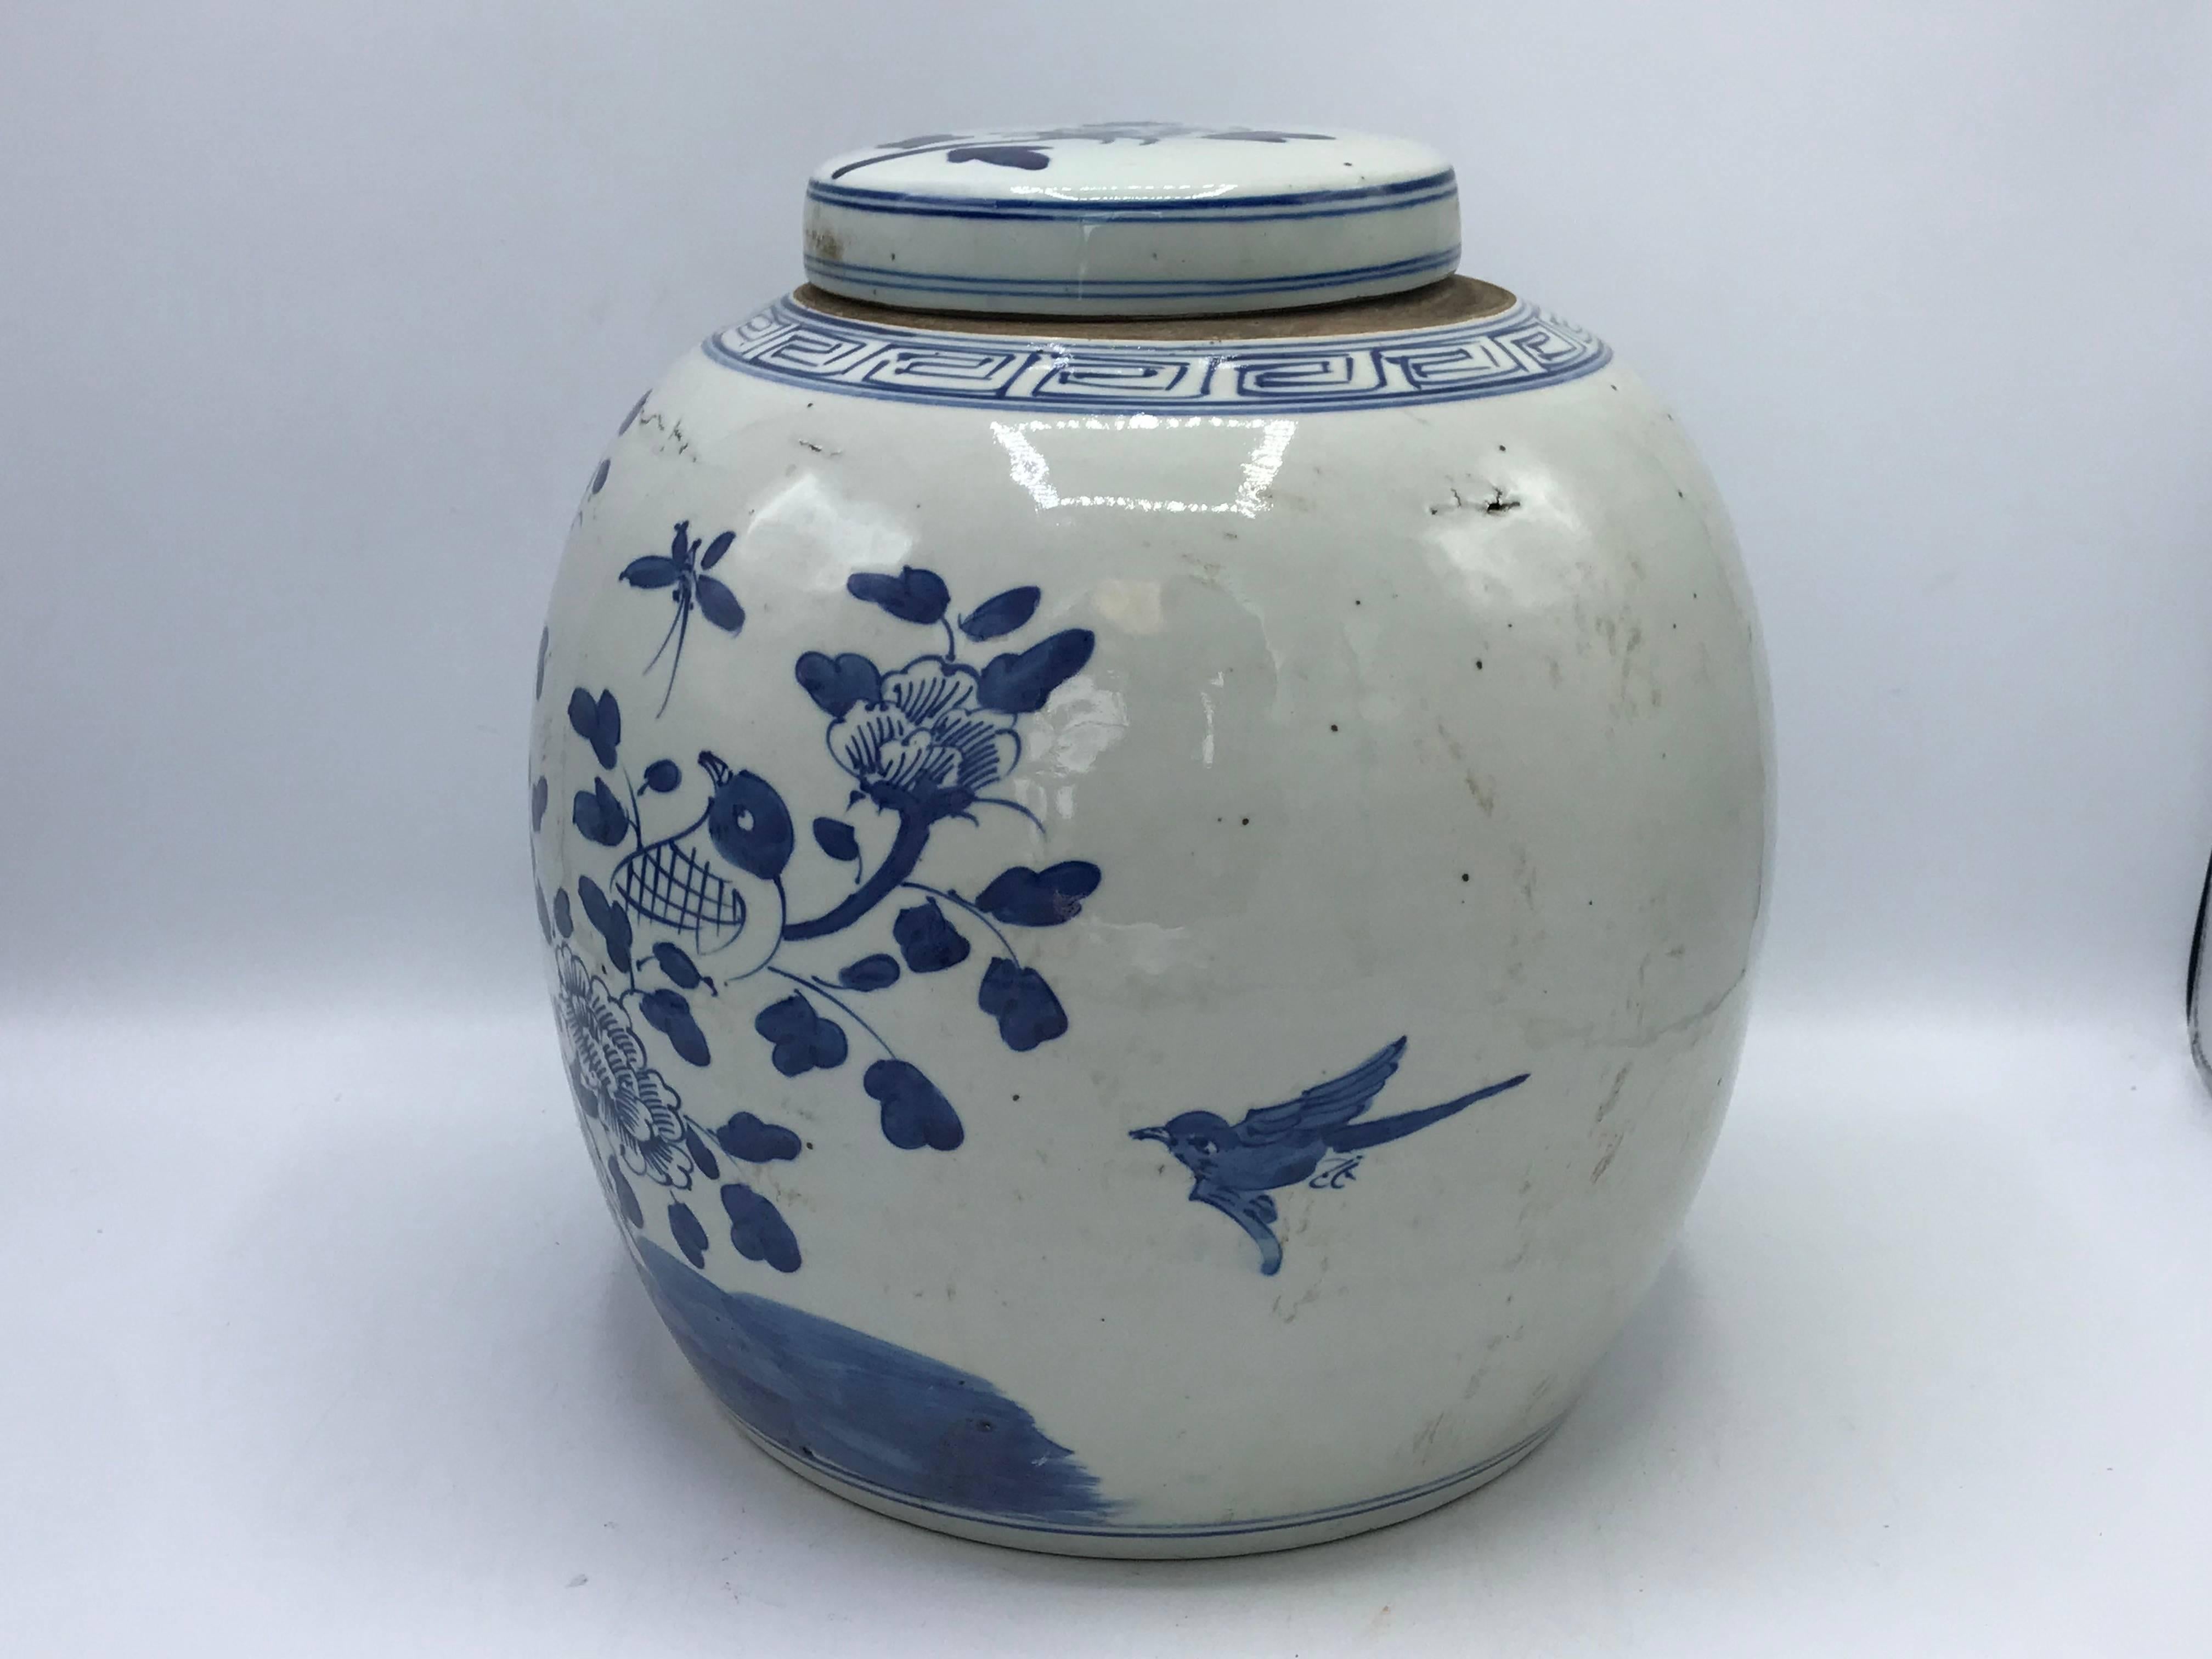 Listed is a fabulous, 19th century blue and white ginger jar. The jar has a beautiful, bird and floral motif all-over. Heavy. Can hold water for floral arrangements.